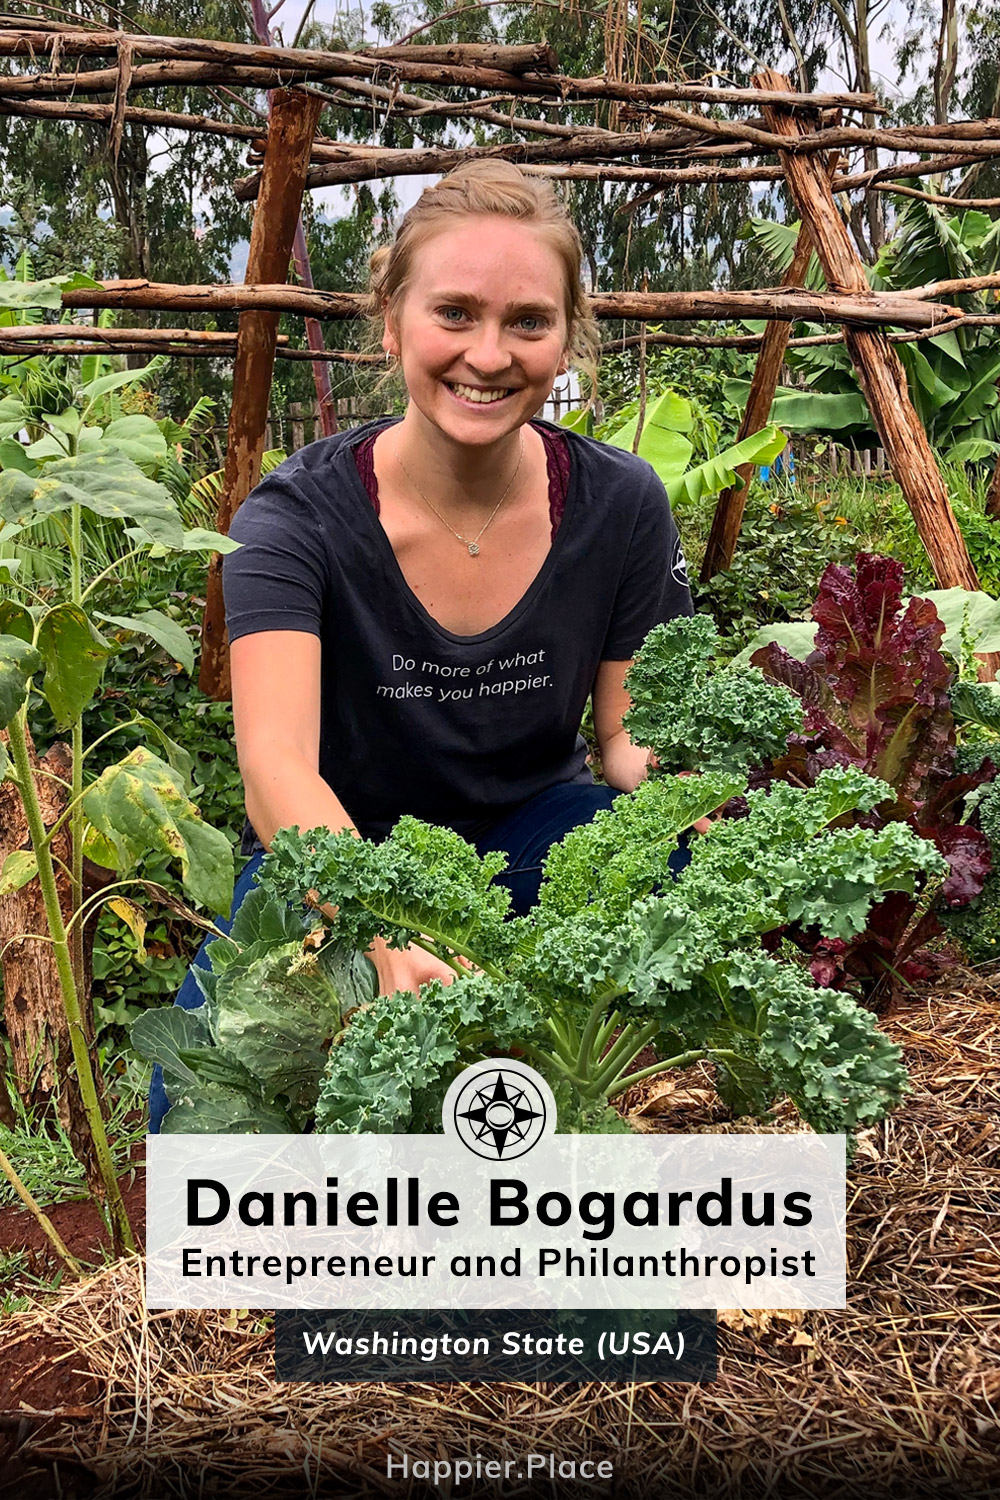 Humanitarian, entrepreneur and philanthropist Danielle Bogardus doing what makes her happier and helping make the world a happier place: working in the garden at an orphan village in Ethiopia. 